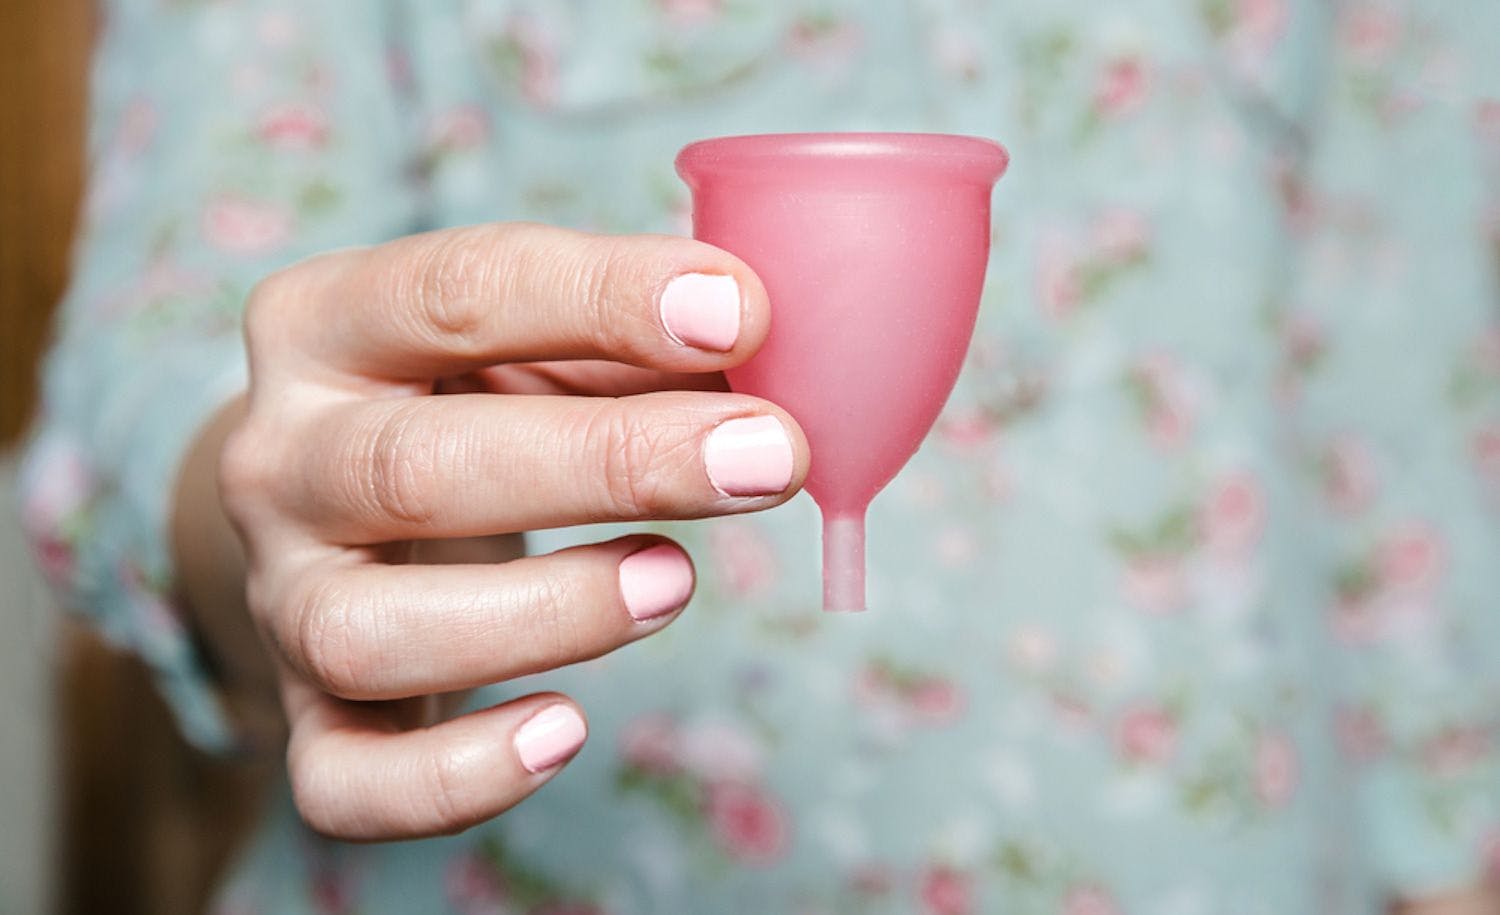 Menstrual Cups Found to be Safe and Effective in First Scientific Review